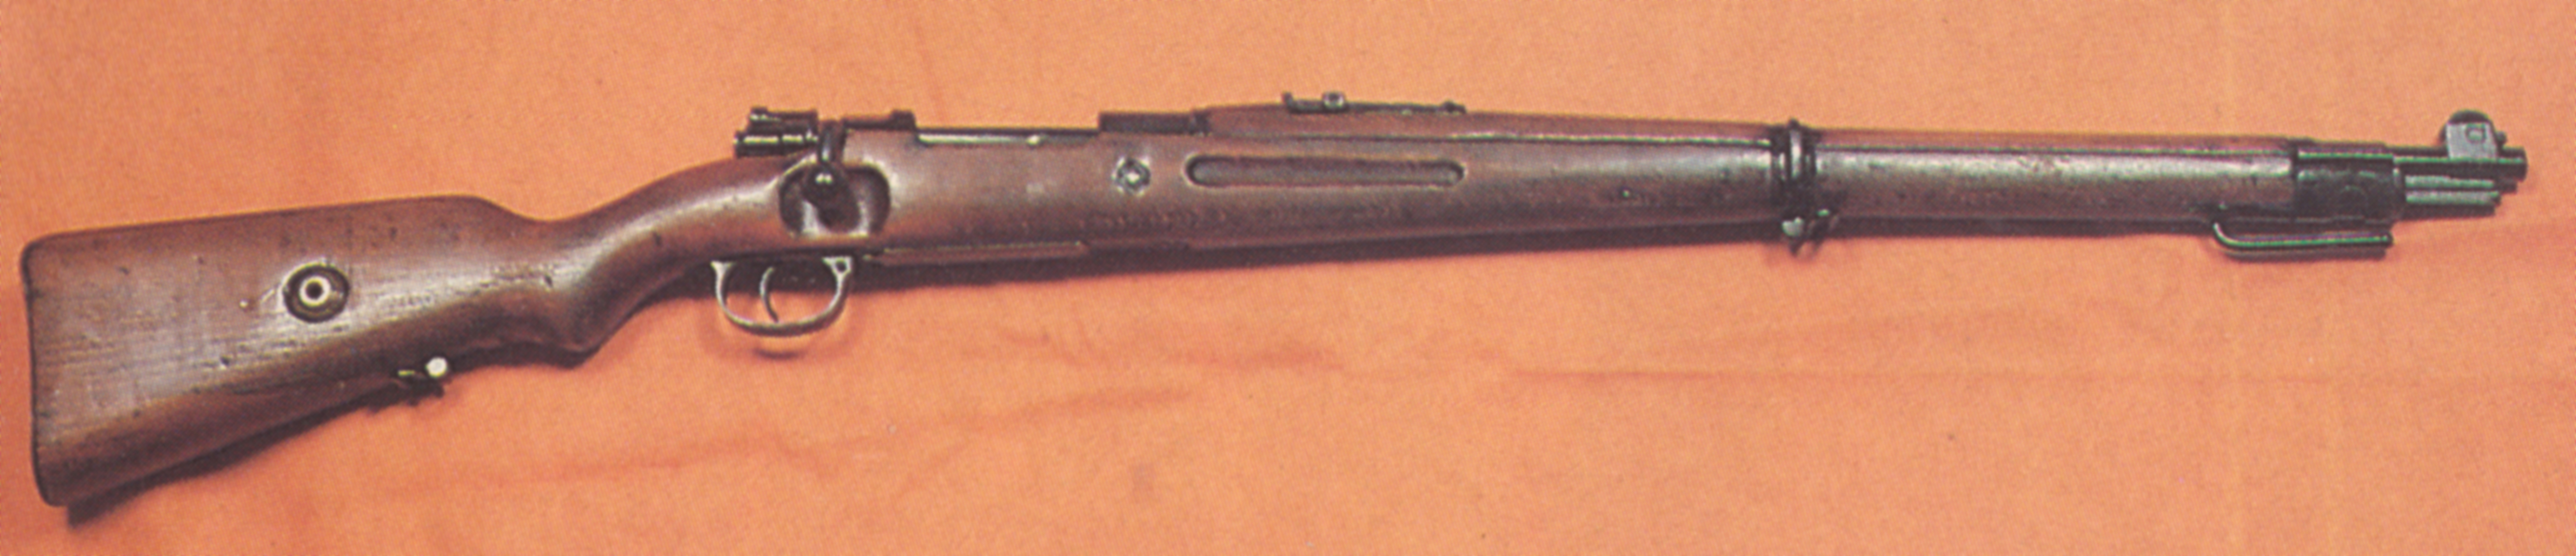 weapons, mauser k98 rifle cellphone